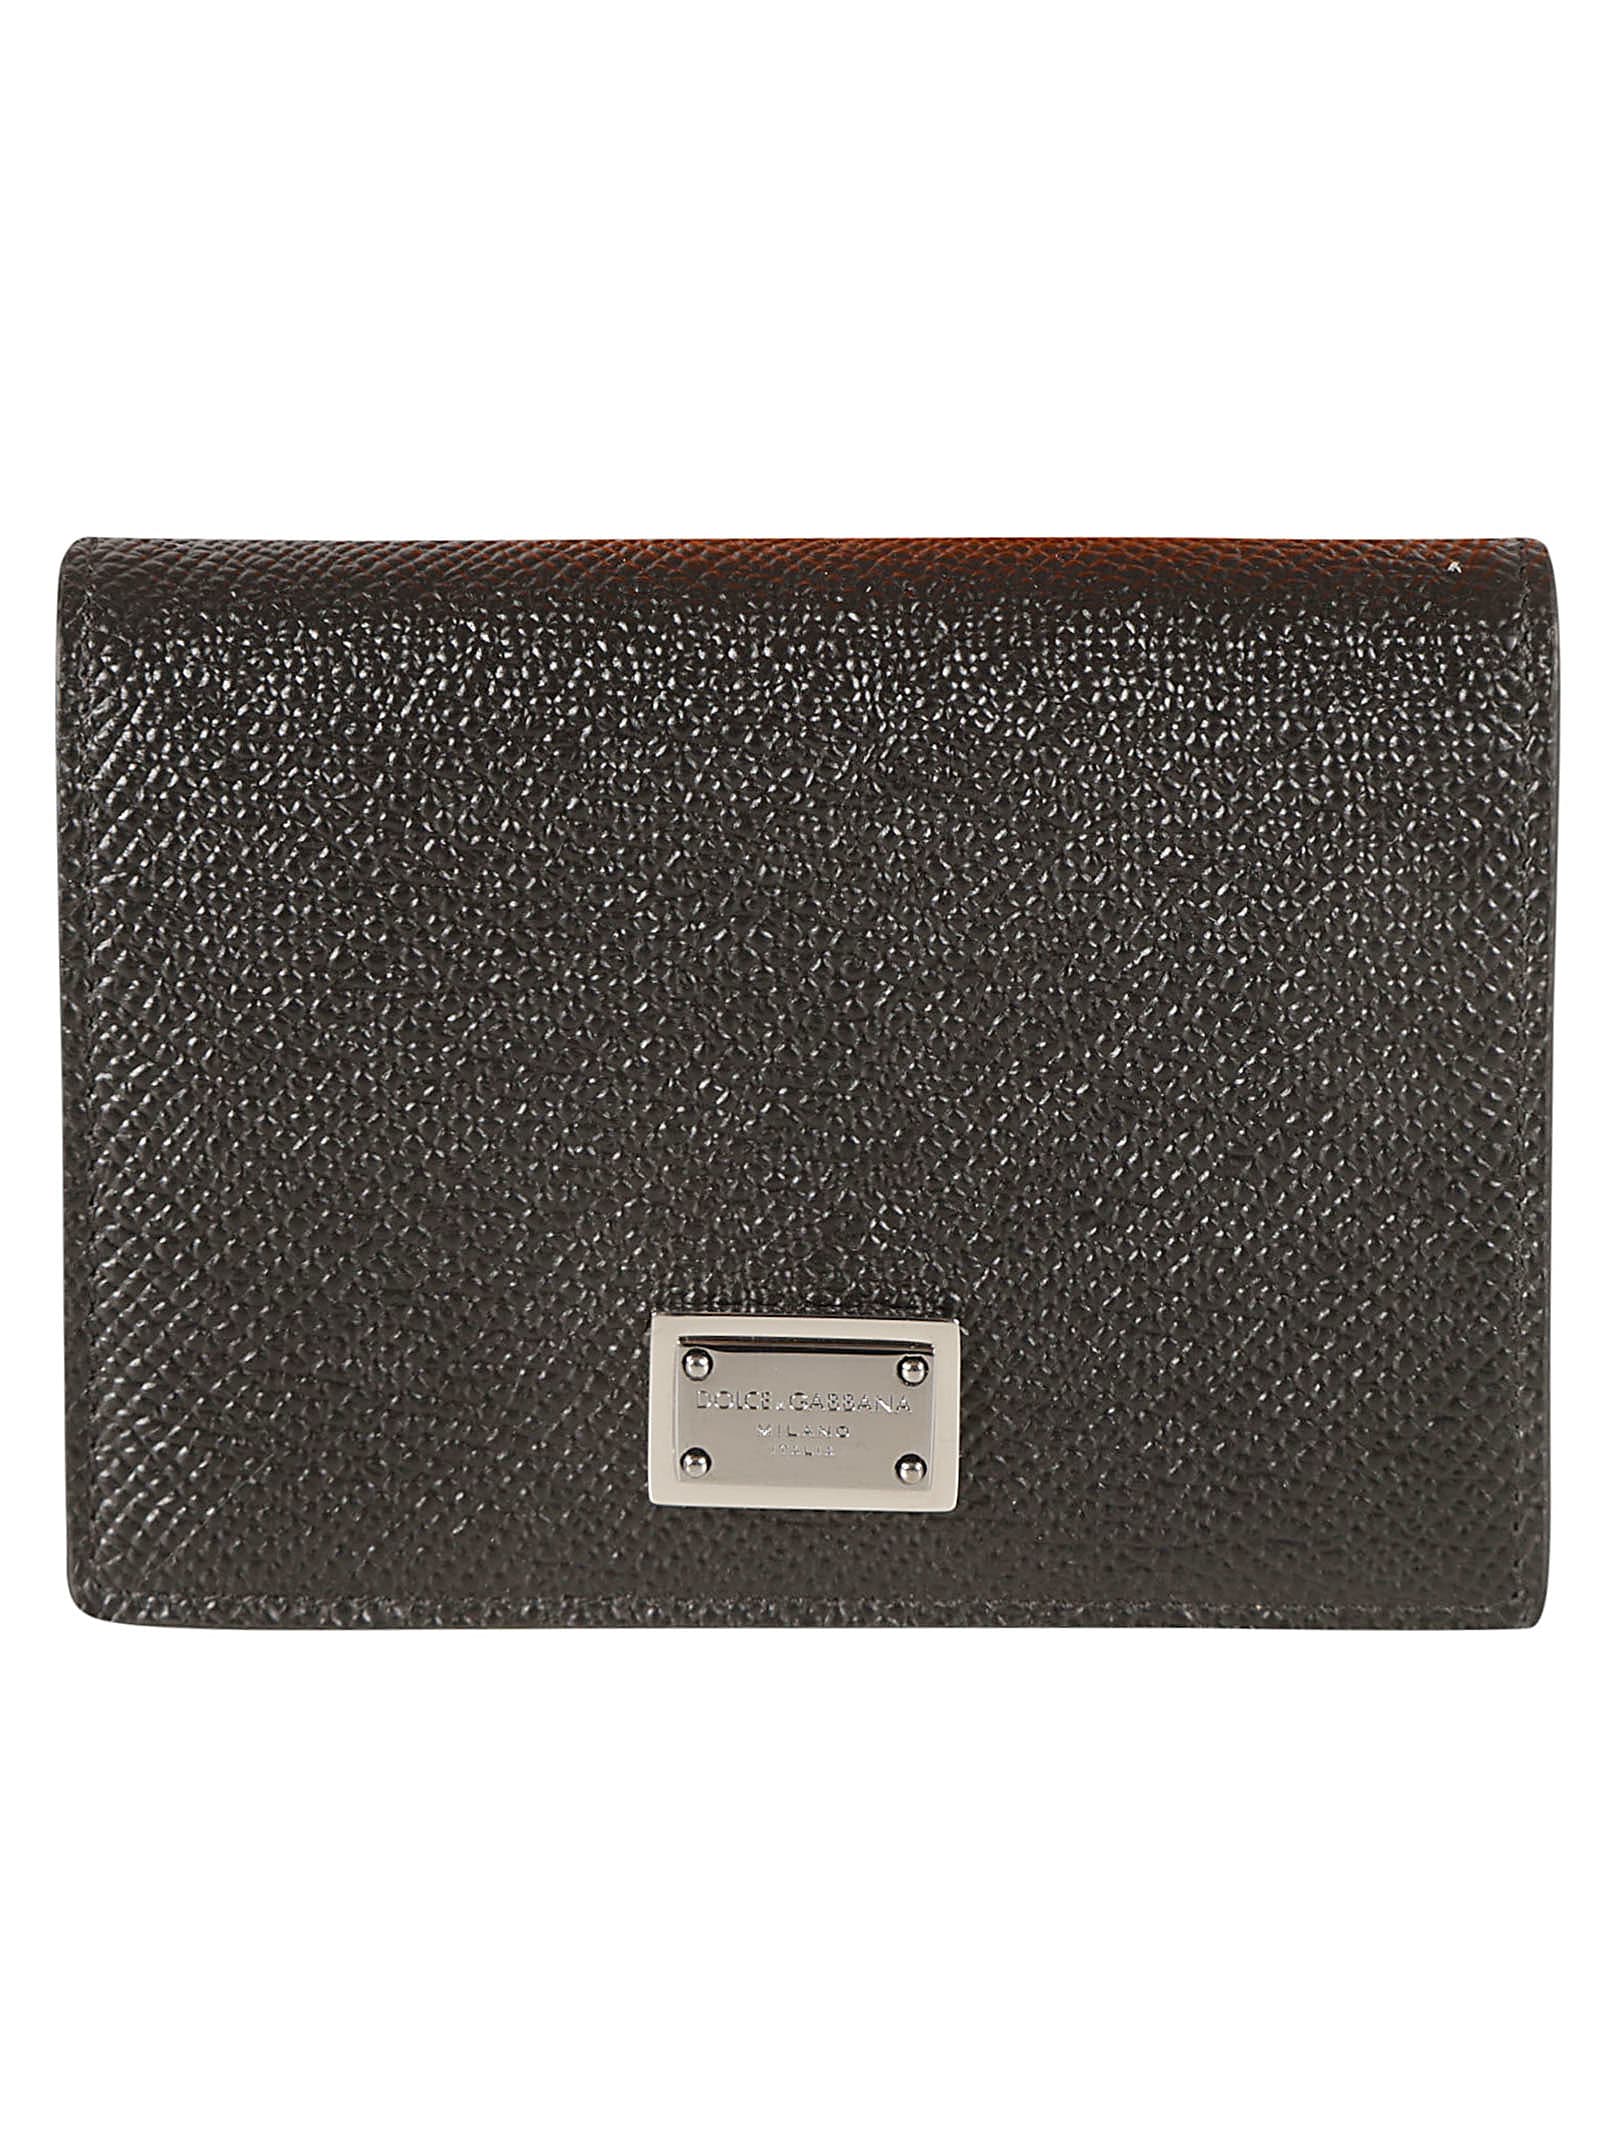 Dolce & Gabbana Grained Leather Logo Plaque Wallet In Black